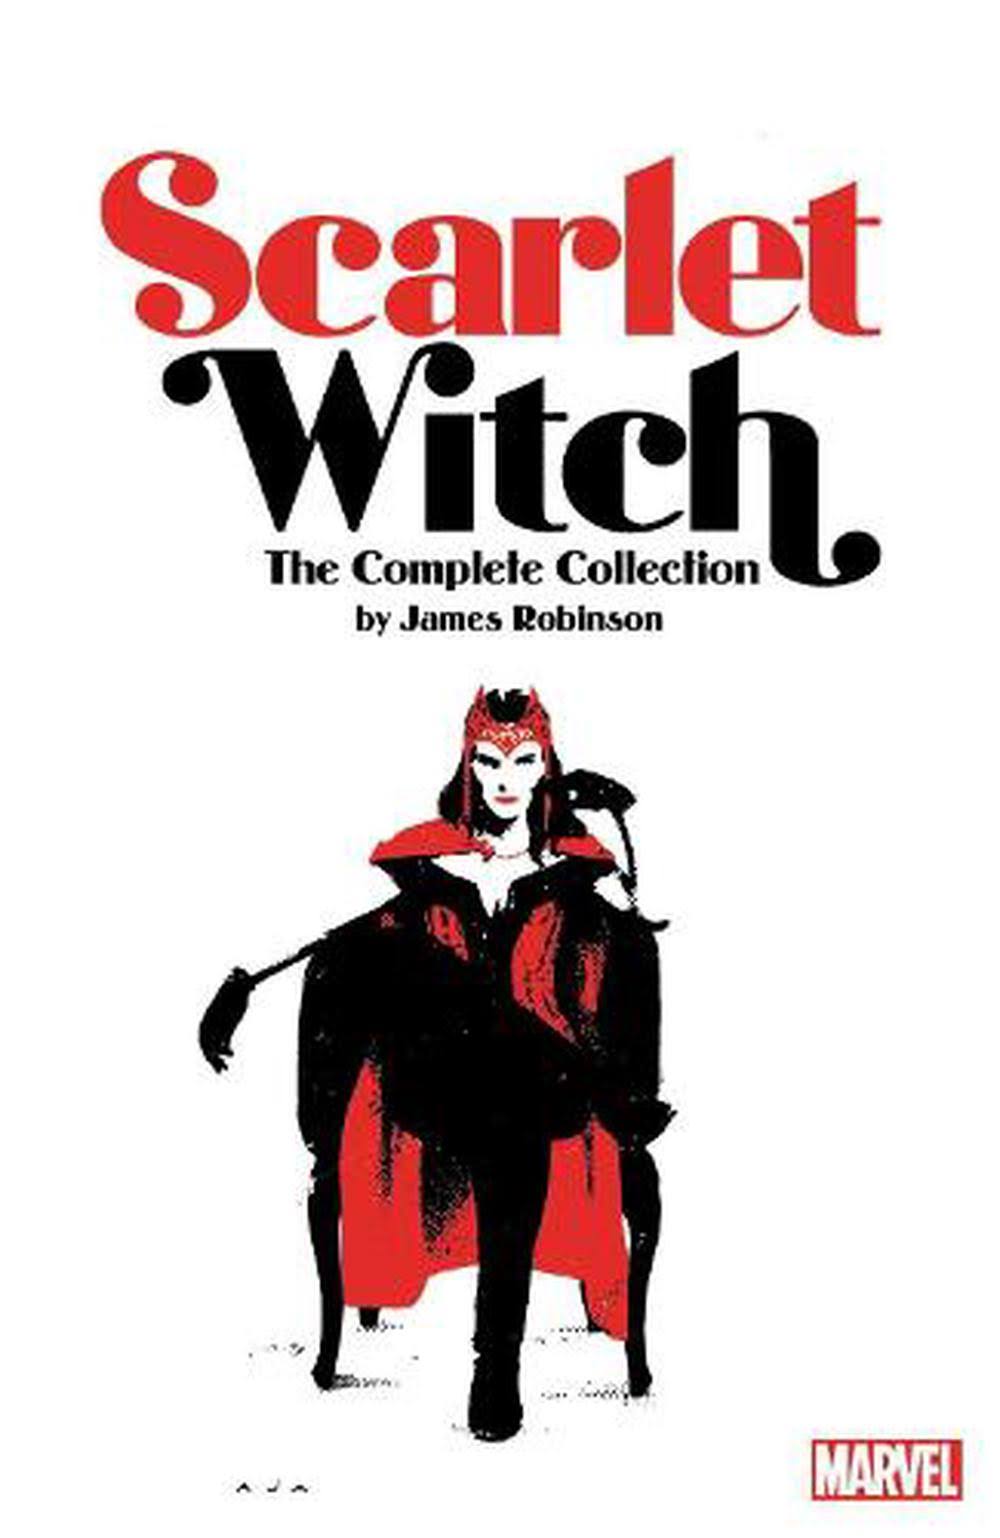 Scarlet Witch by James Robinson: The Complete Collection